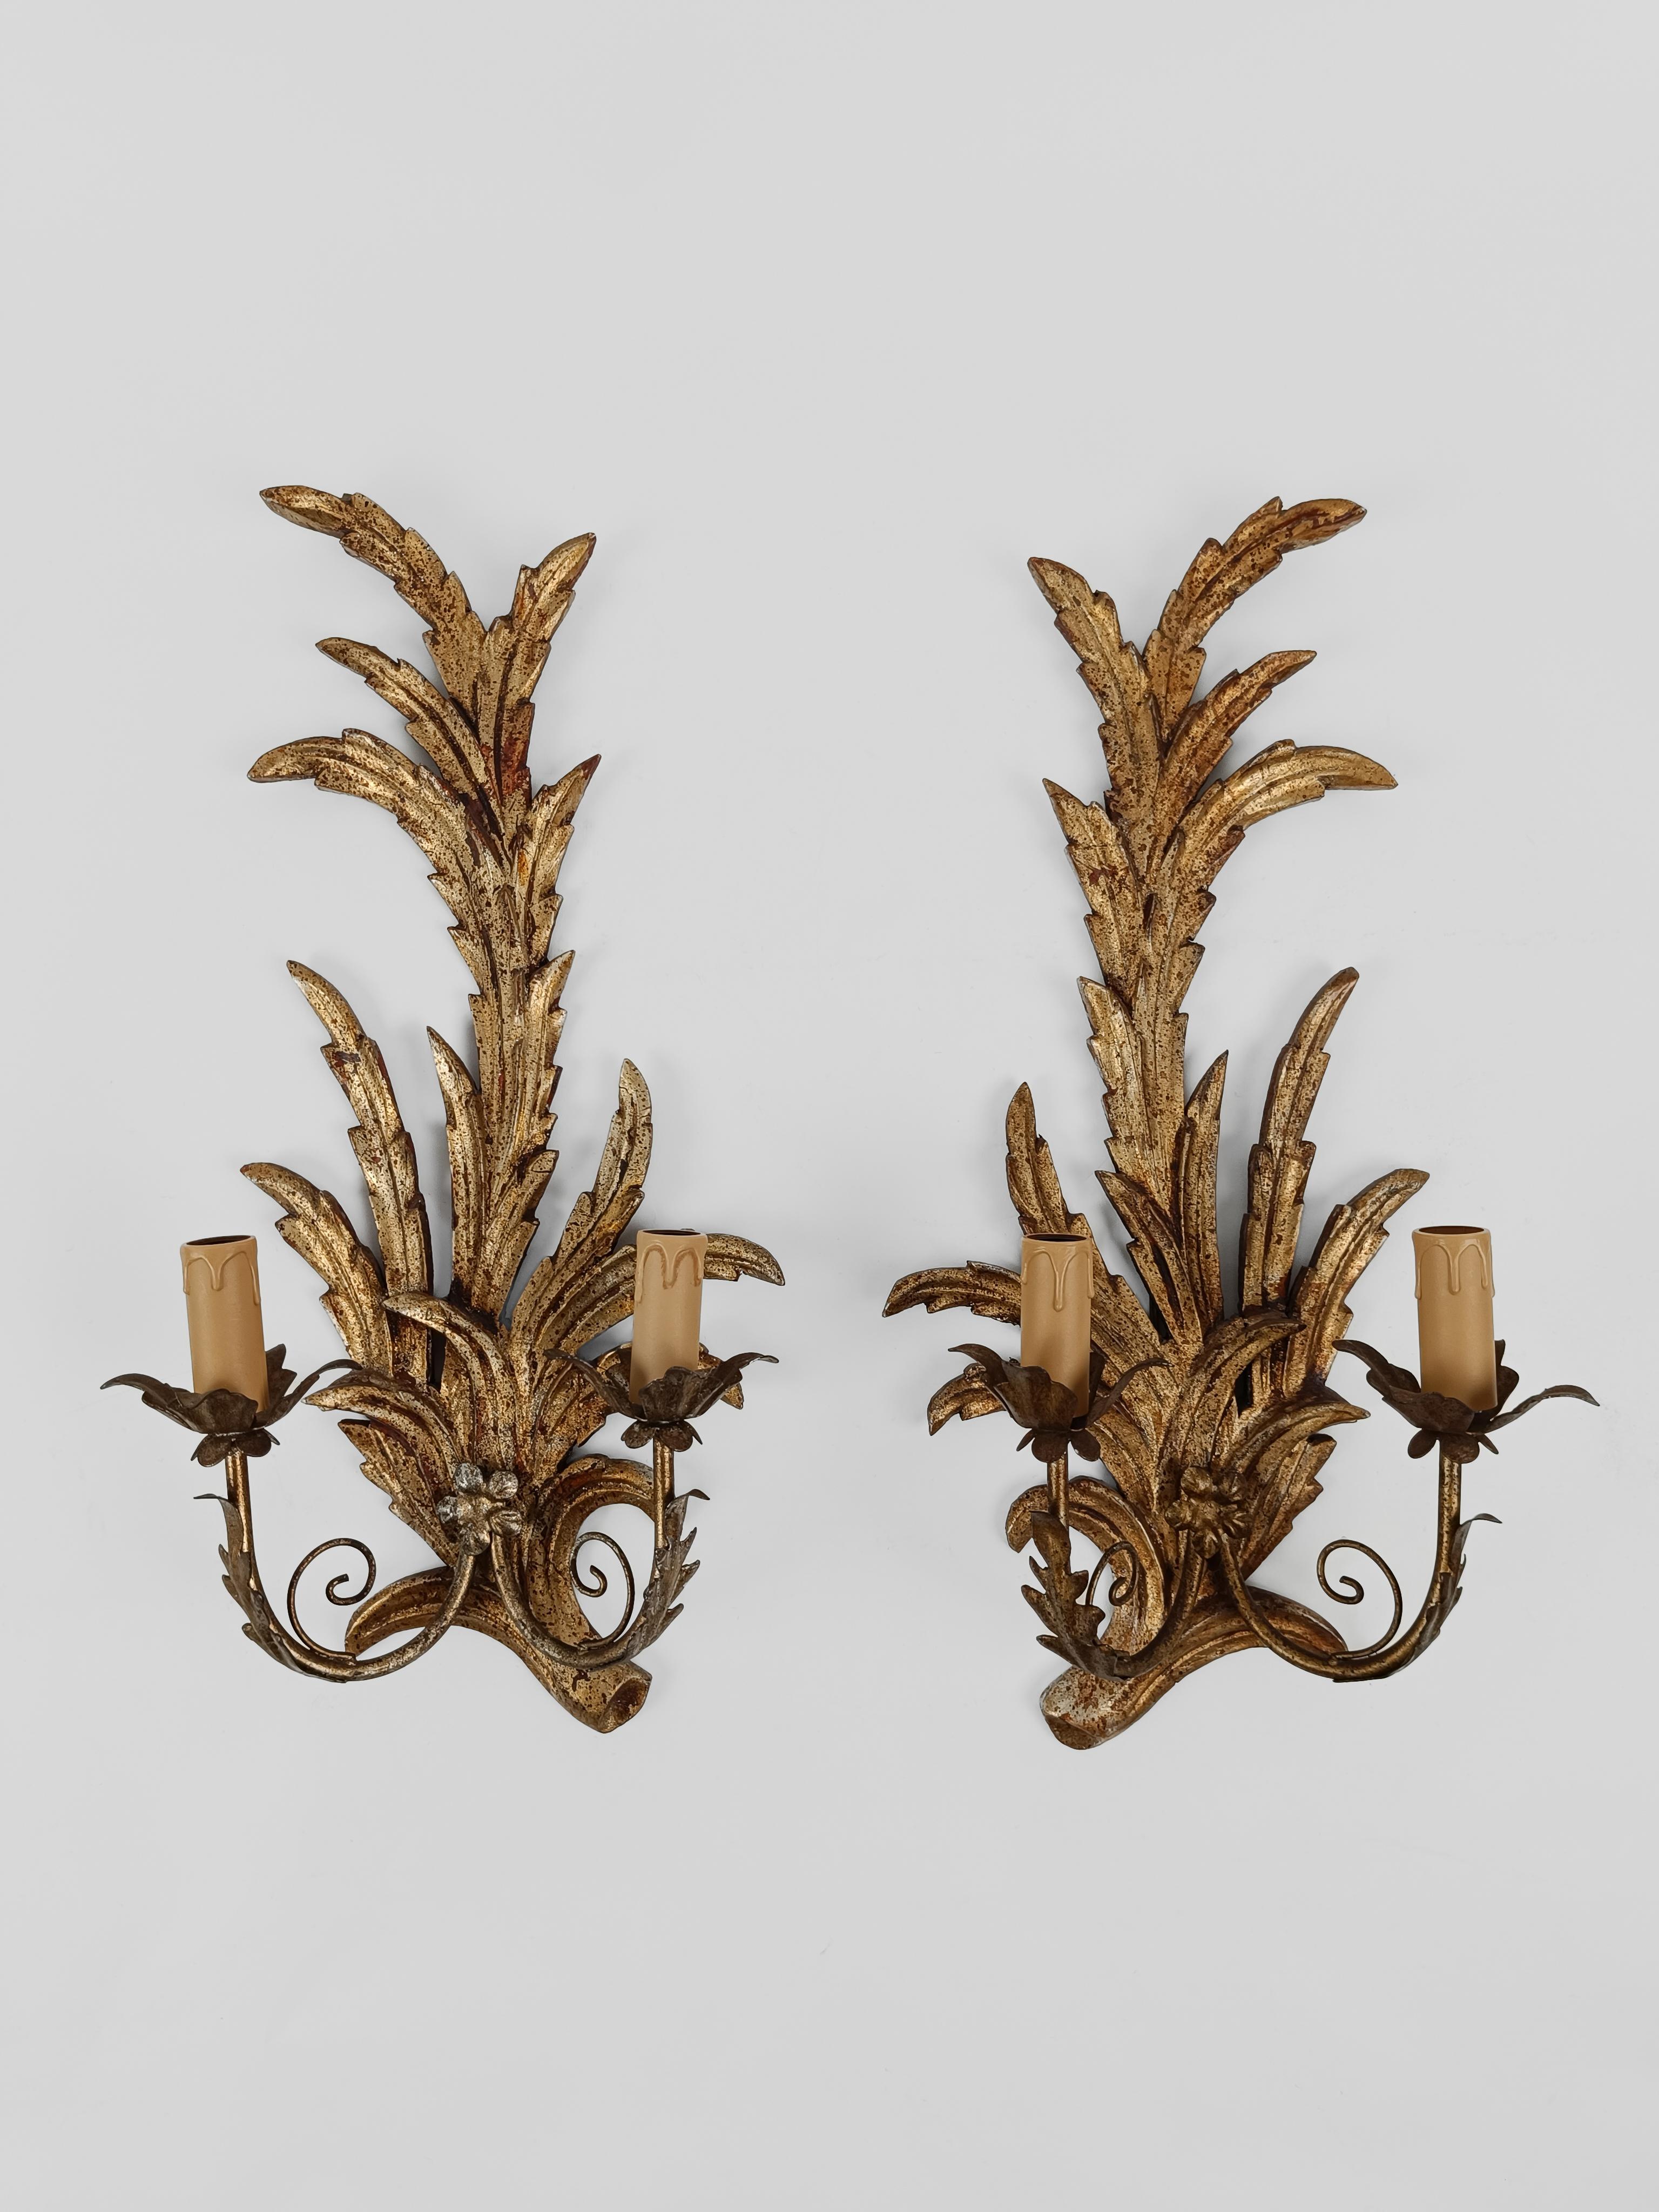 Florentine Italian Pair of Giltwood Leaf  Wall Lights Sconces in Baroque Style For Sale 3